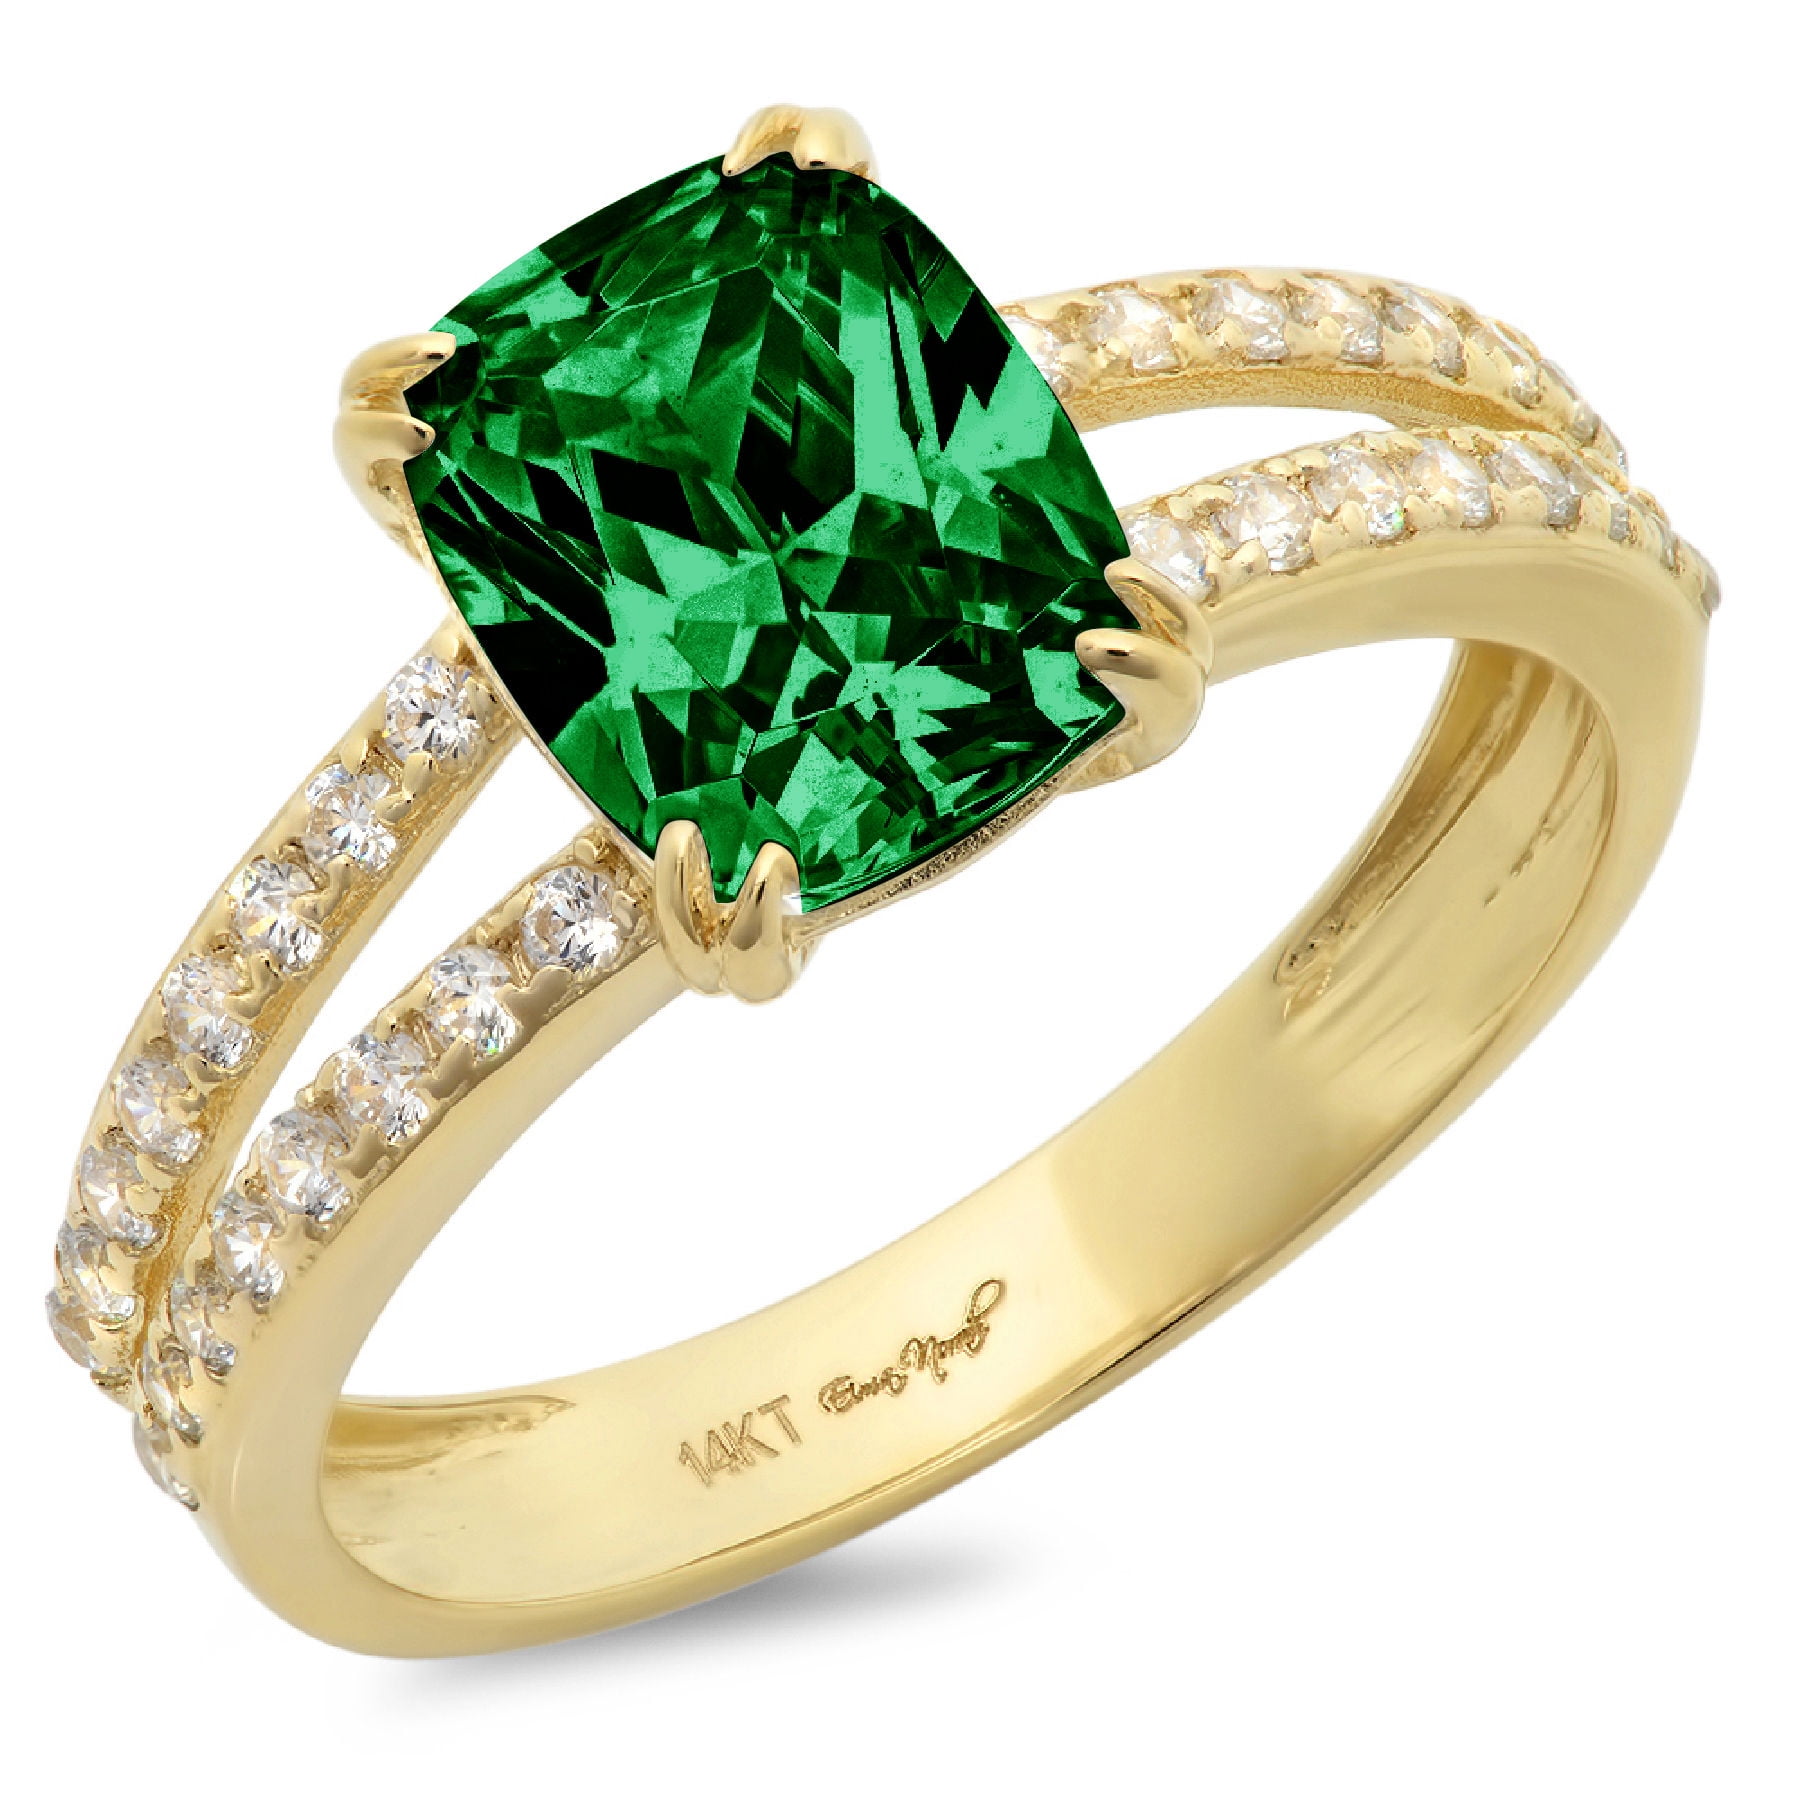 Silver Gems Factory 1.00 Ct Round Cut Cz Green Emerald 14k Yellow Gold Plated Cushion Halo Engagement Wedding Ring Set